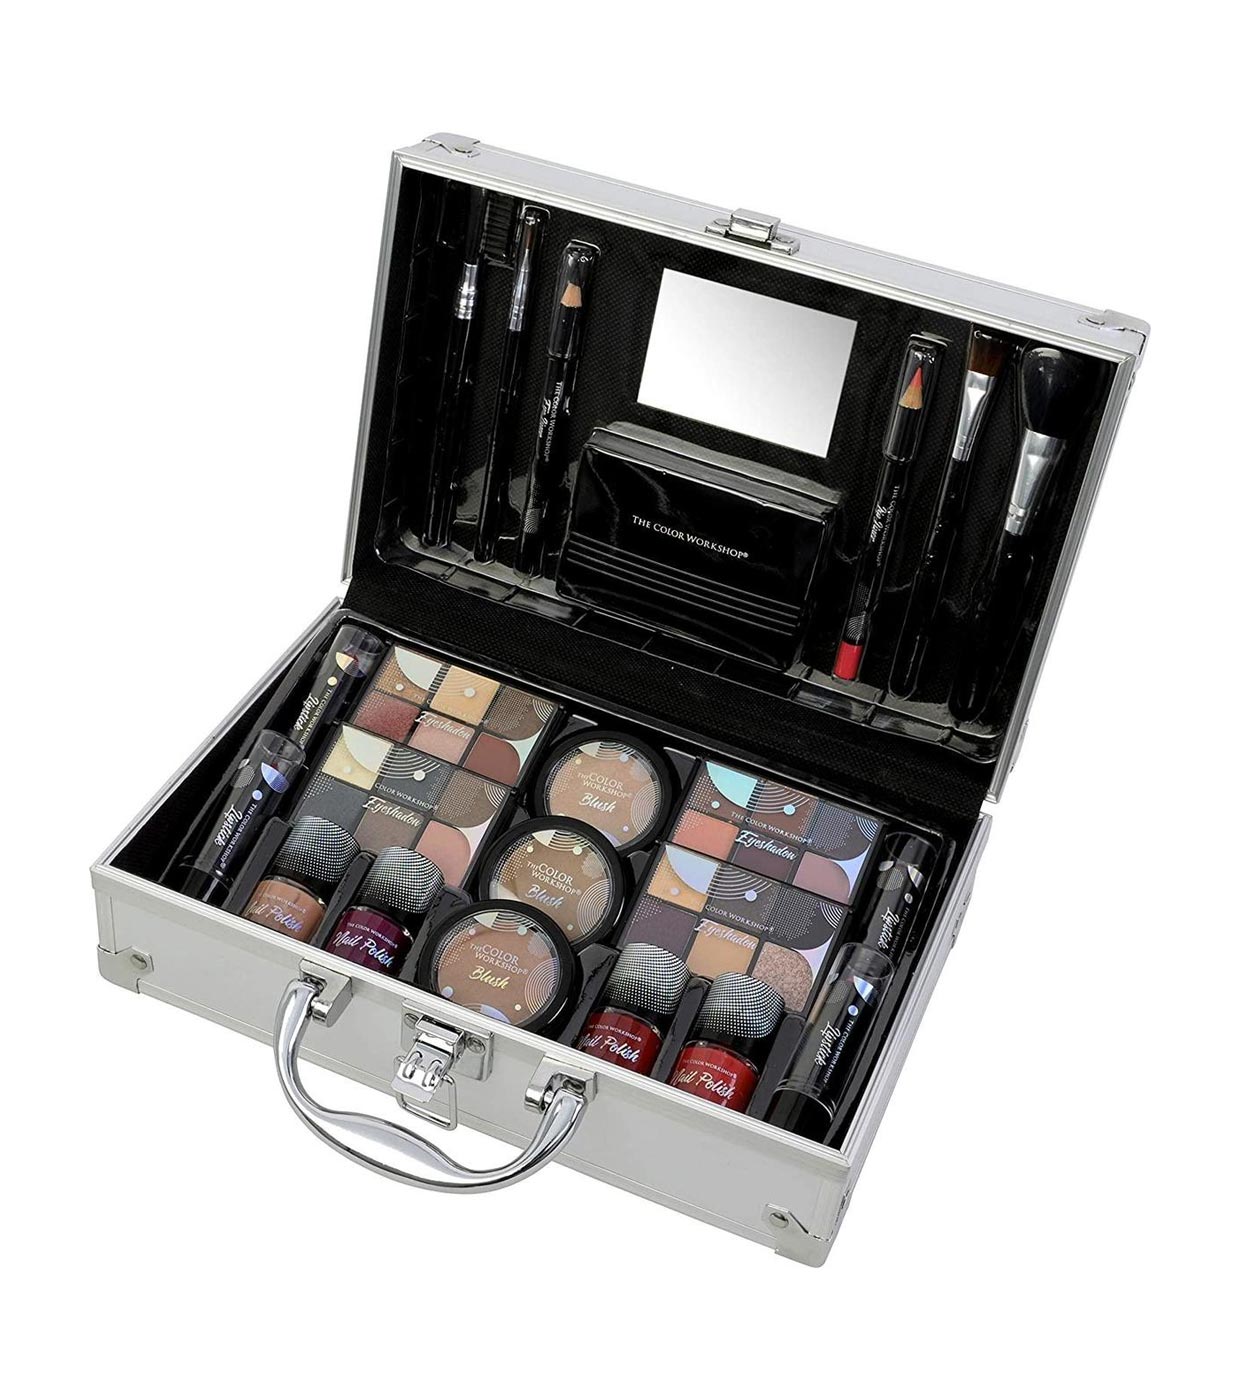 The Color Work Makeup Case